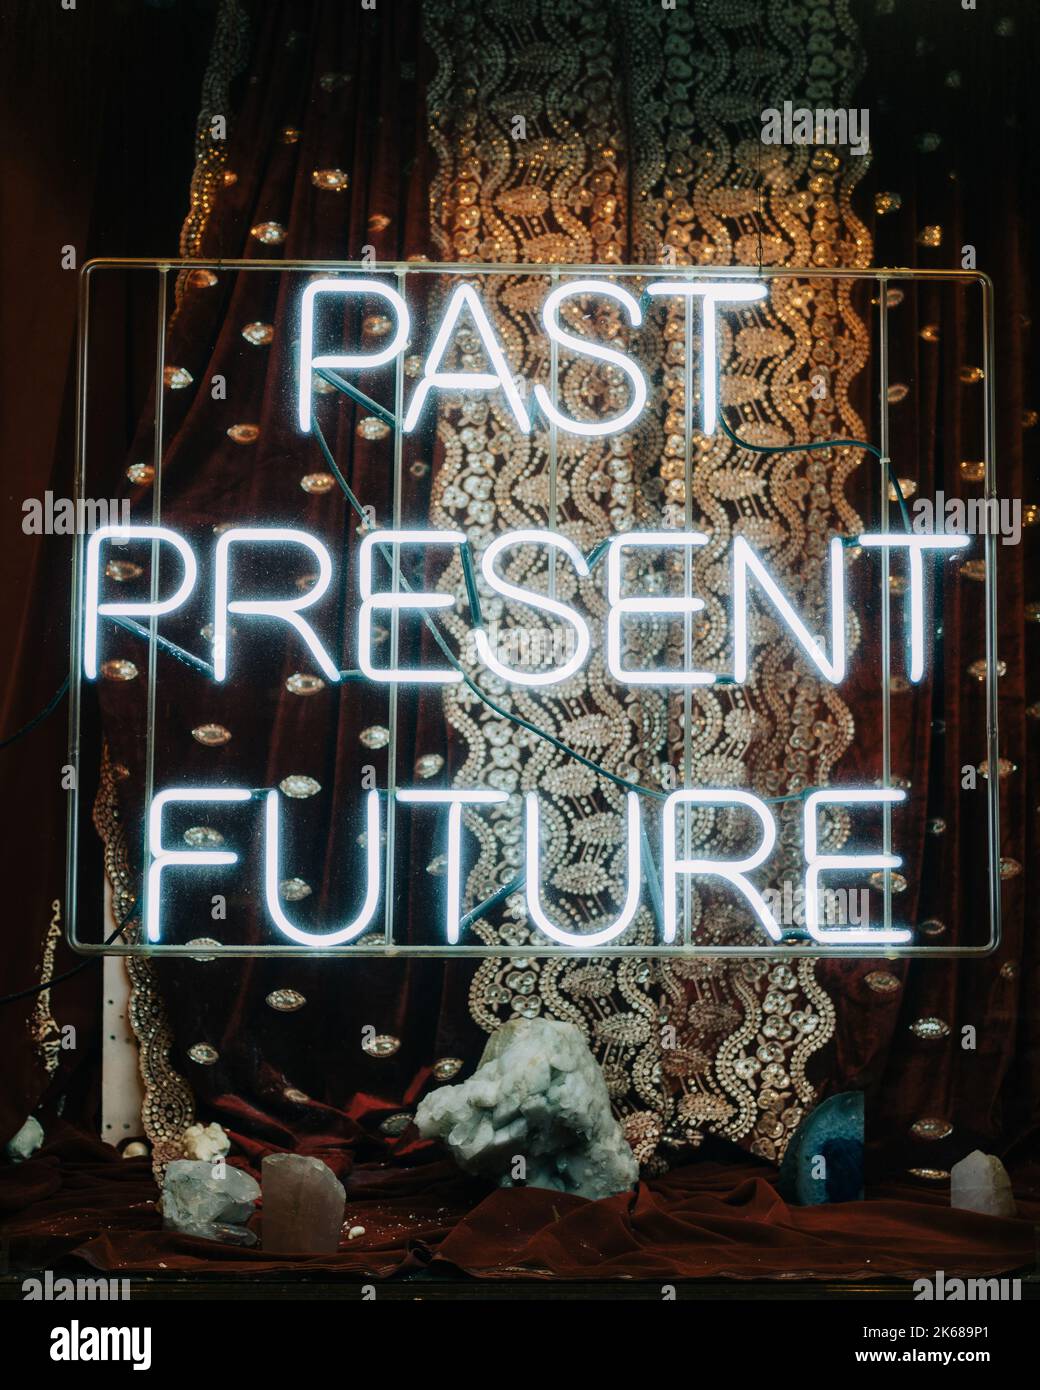 Past, Present, Future neon sign at a psychic reader, Manhattan, New York Stock Photo